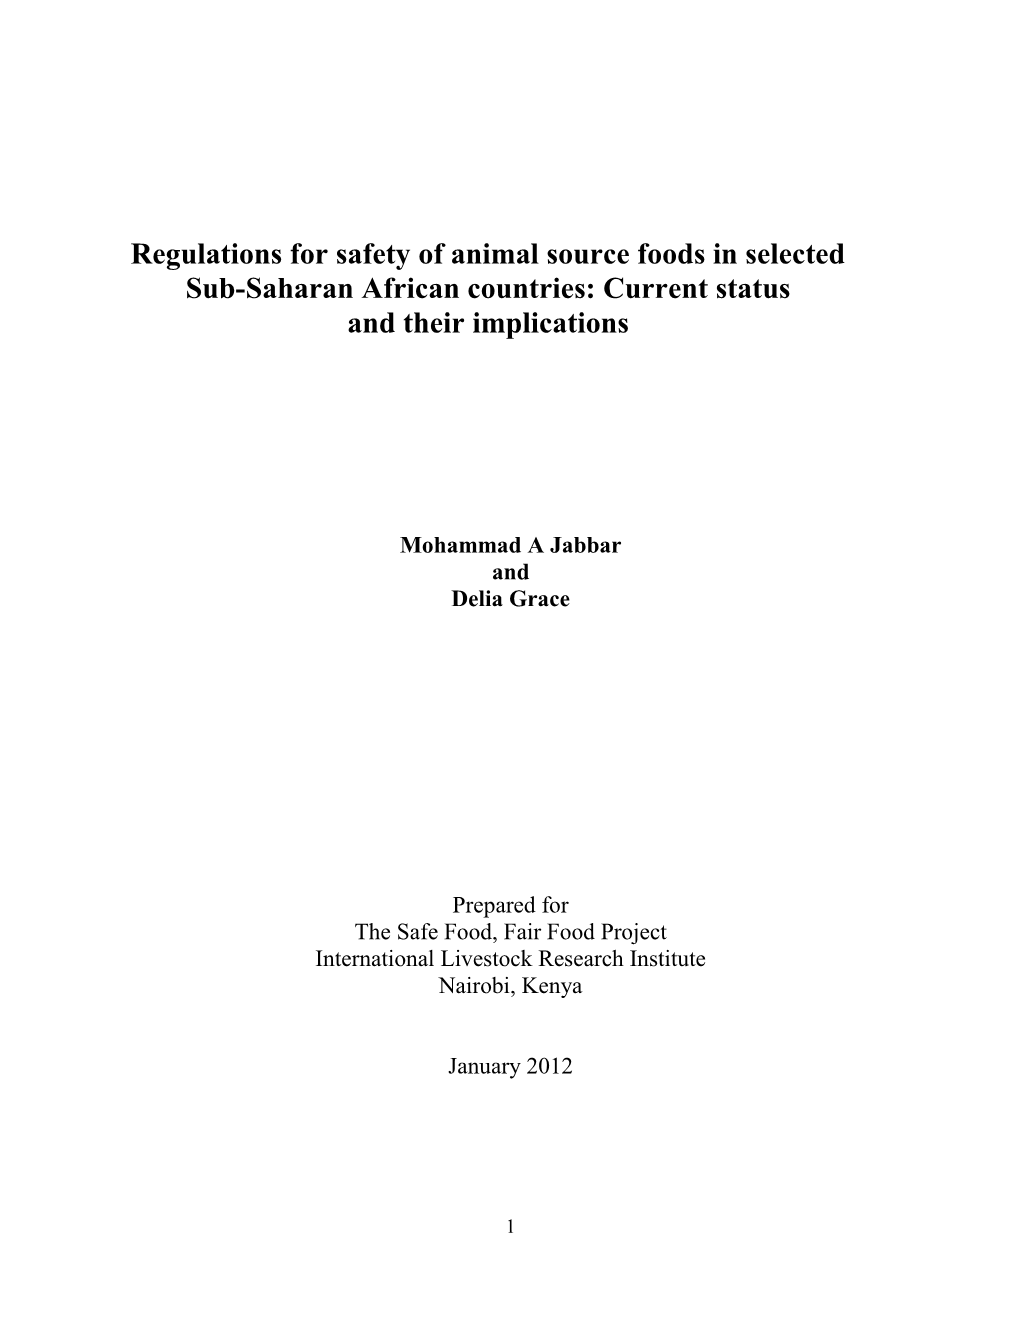 Regulations for Safety of Animal Source Foods in Selected Sub-Saharan African Countries: Current Status and Their Implications